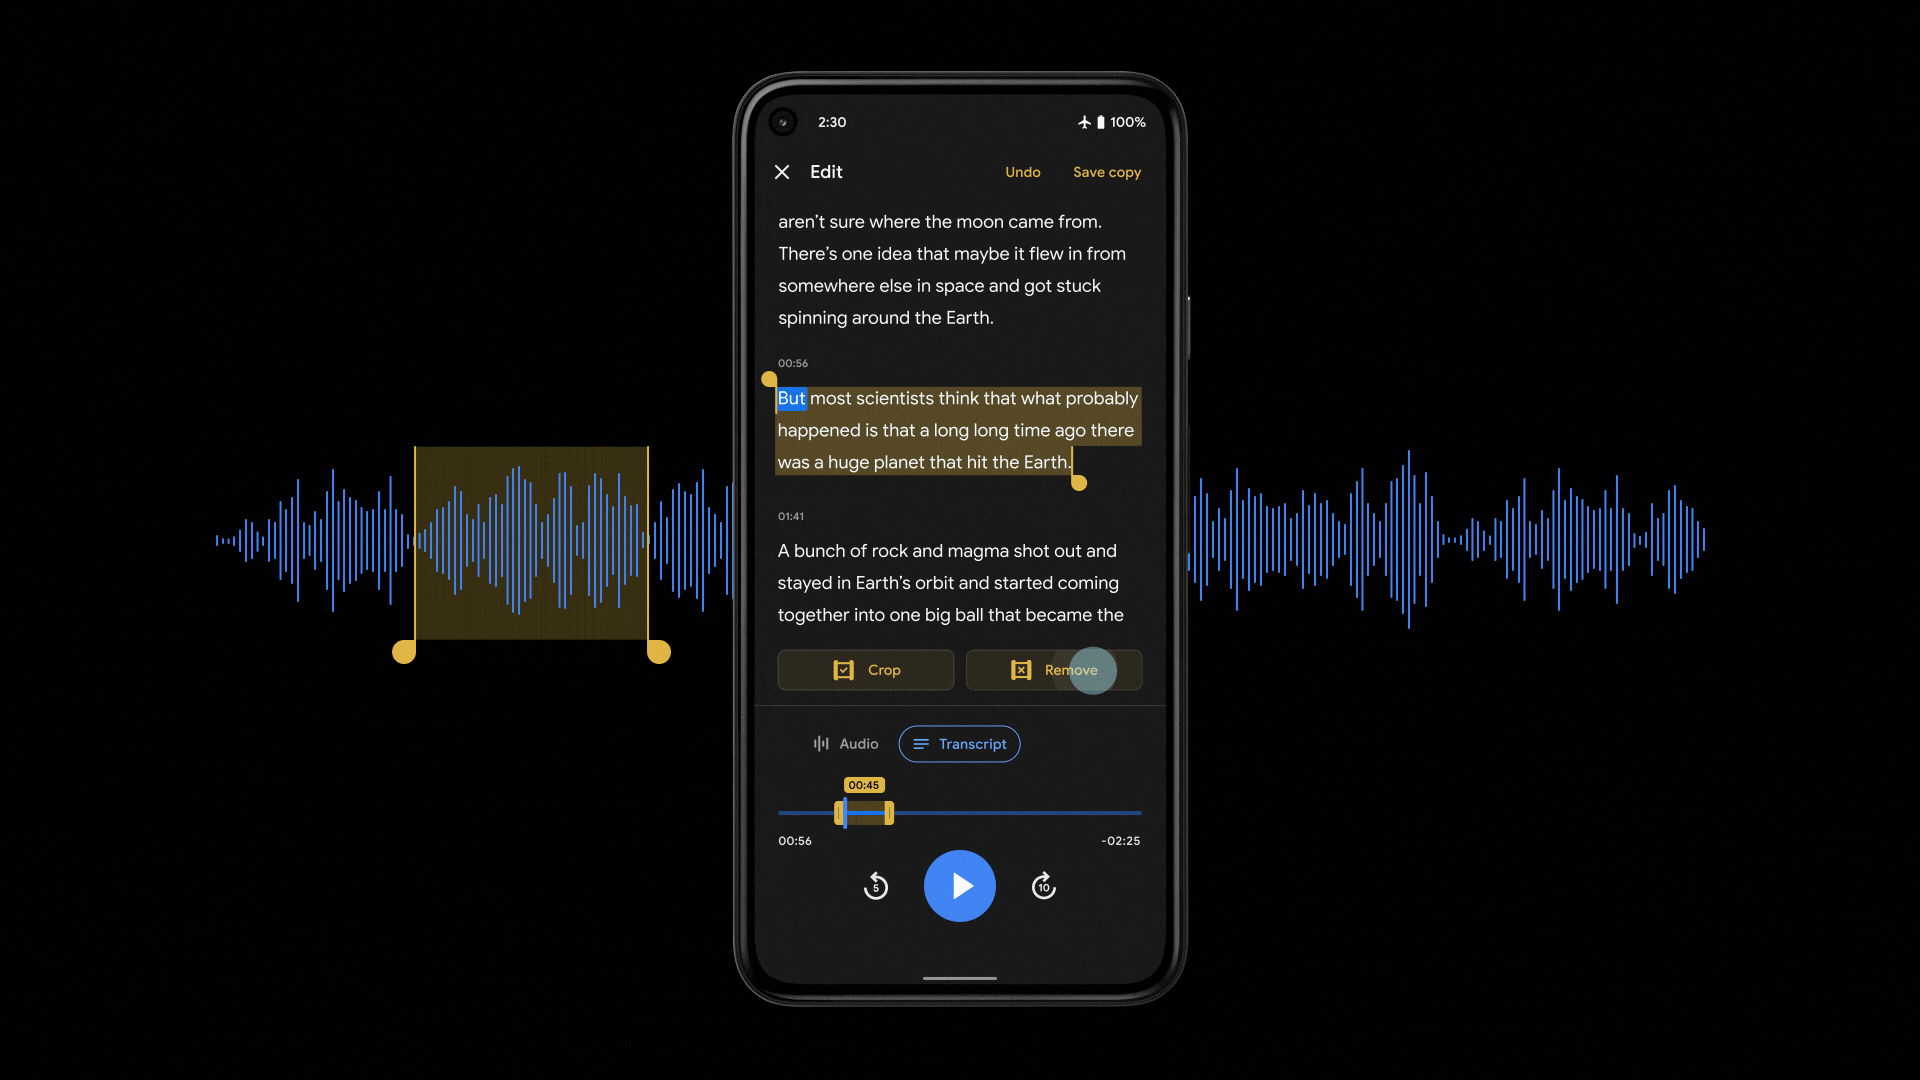 Google’s updated Recorder app allows for easy audio editing and sharing